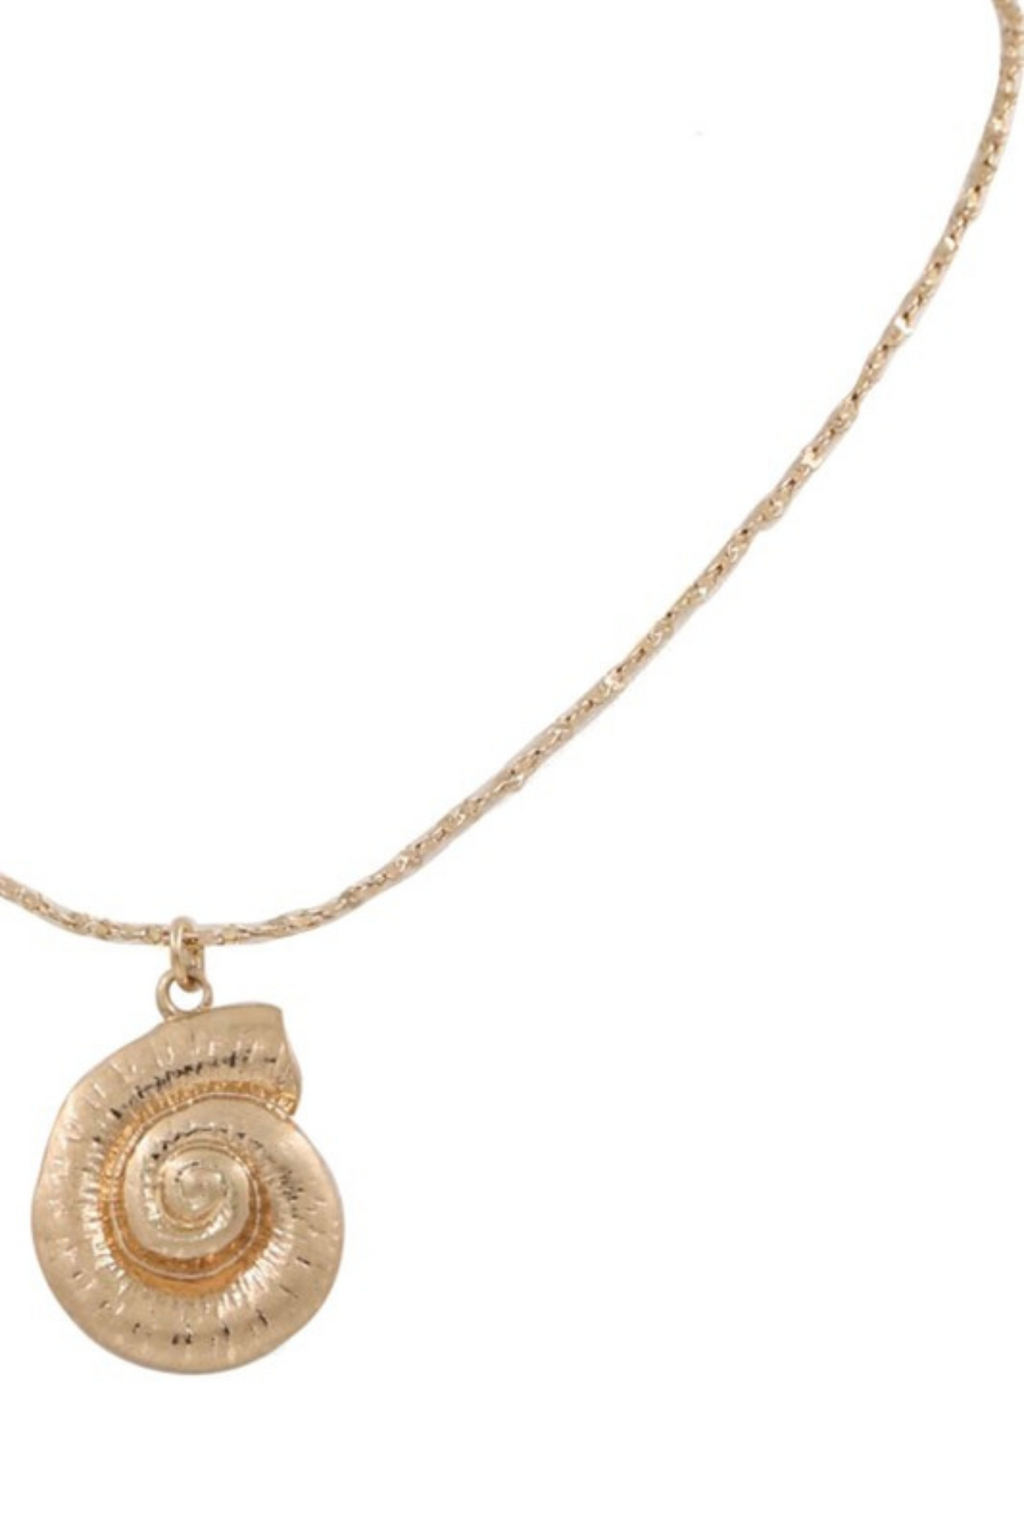 GOLDEN SHELL NECKLACE